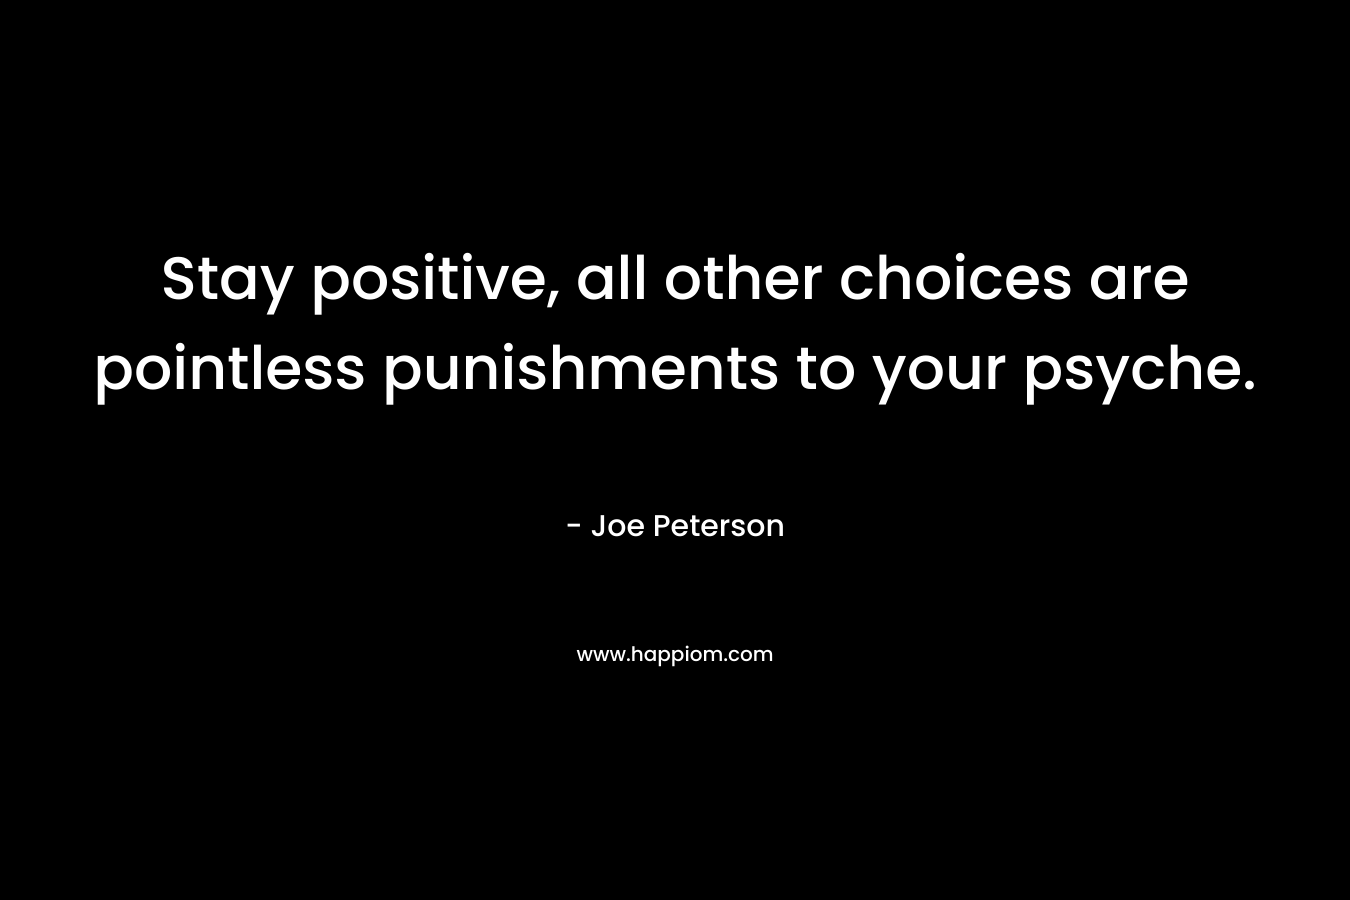 Stay positive, all other choices are pointless punishments to your psyche.